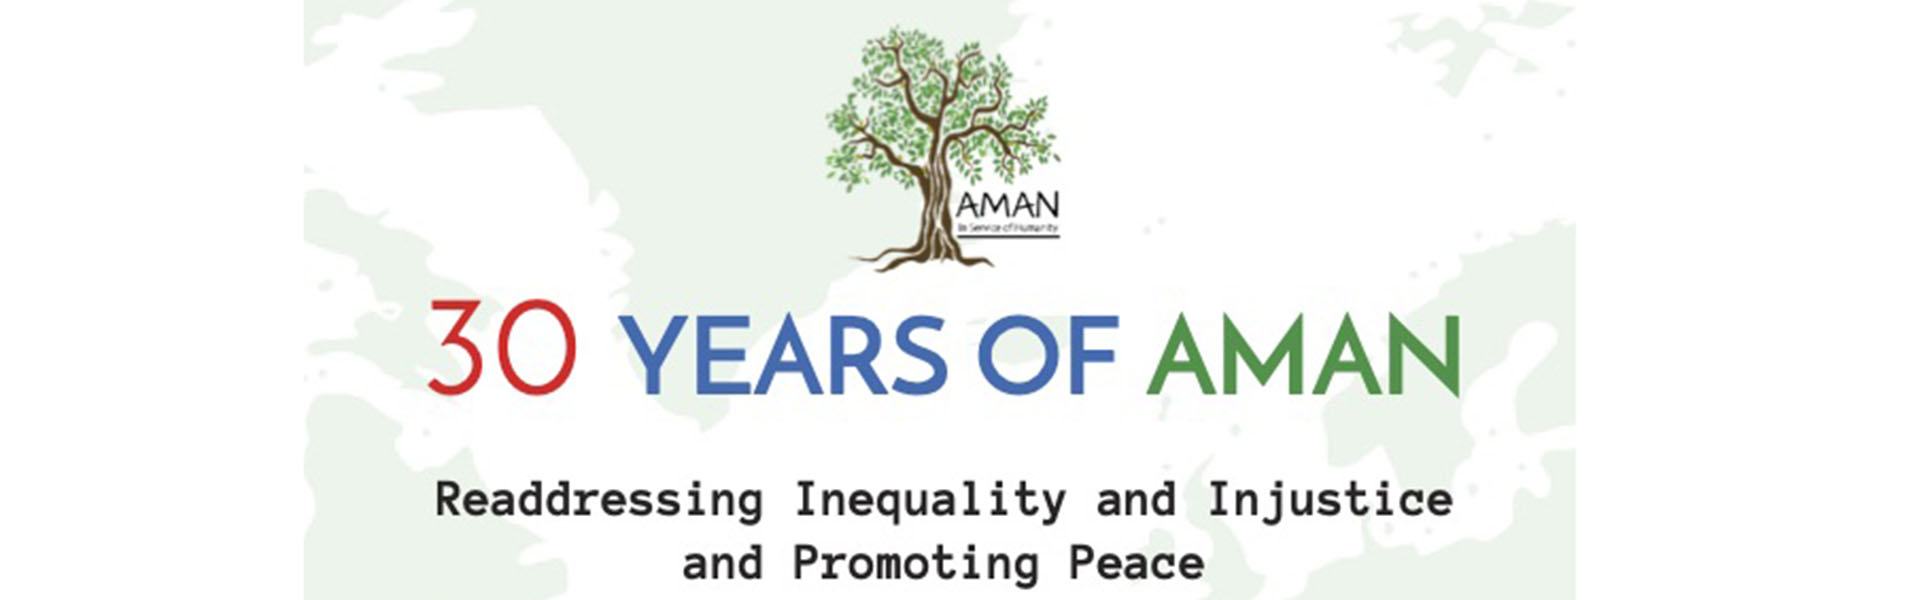 30 Years of AMAN Readdressing Inequality and Injustice and Promoting Peace and tree with AMAN in Service of Humanity